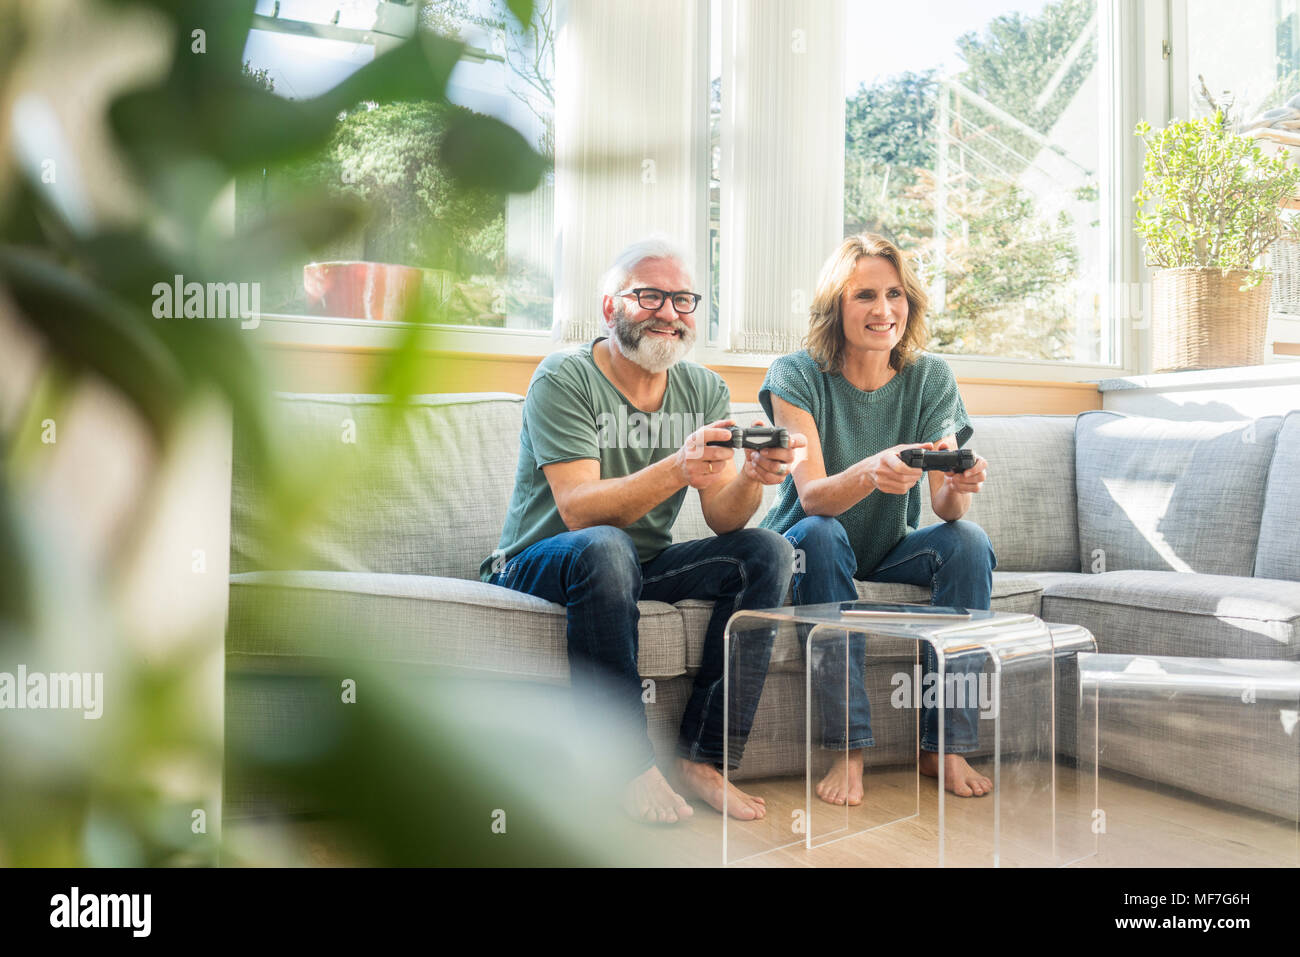 Happy mature couple sitting on couch at home playing video game Stock Photo